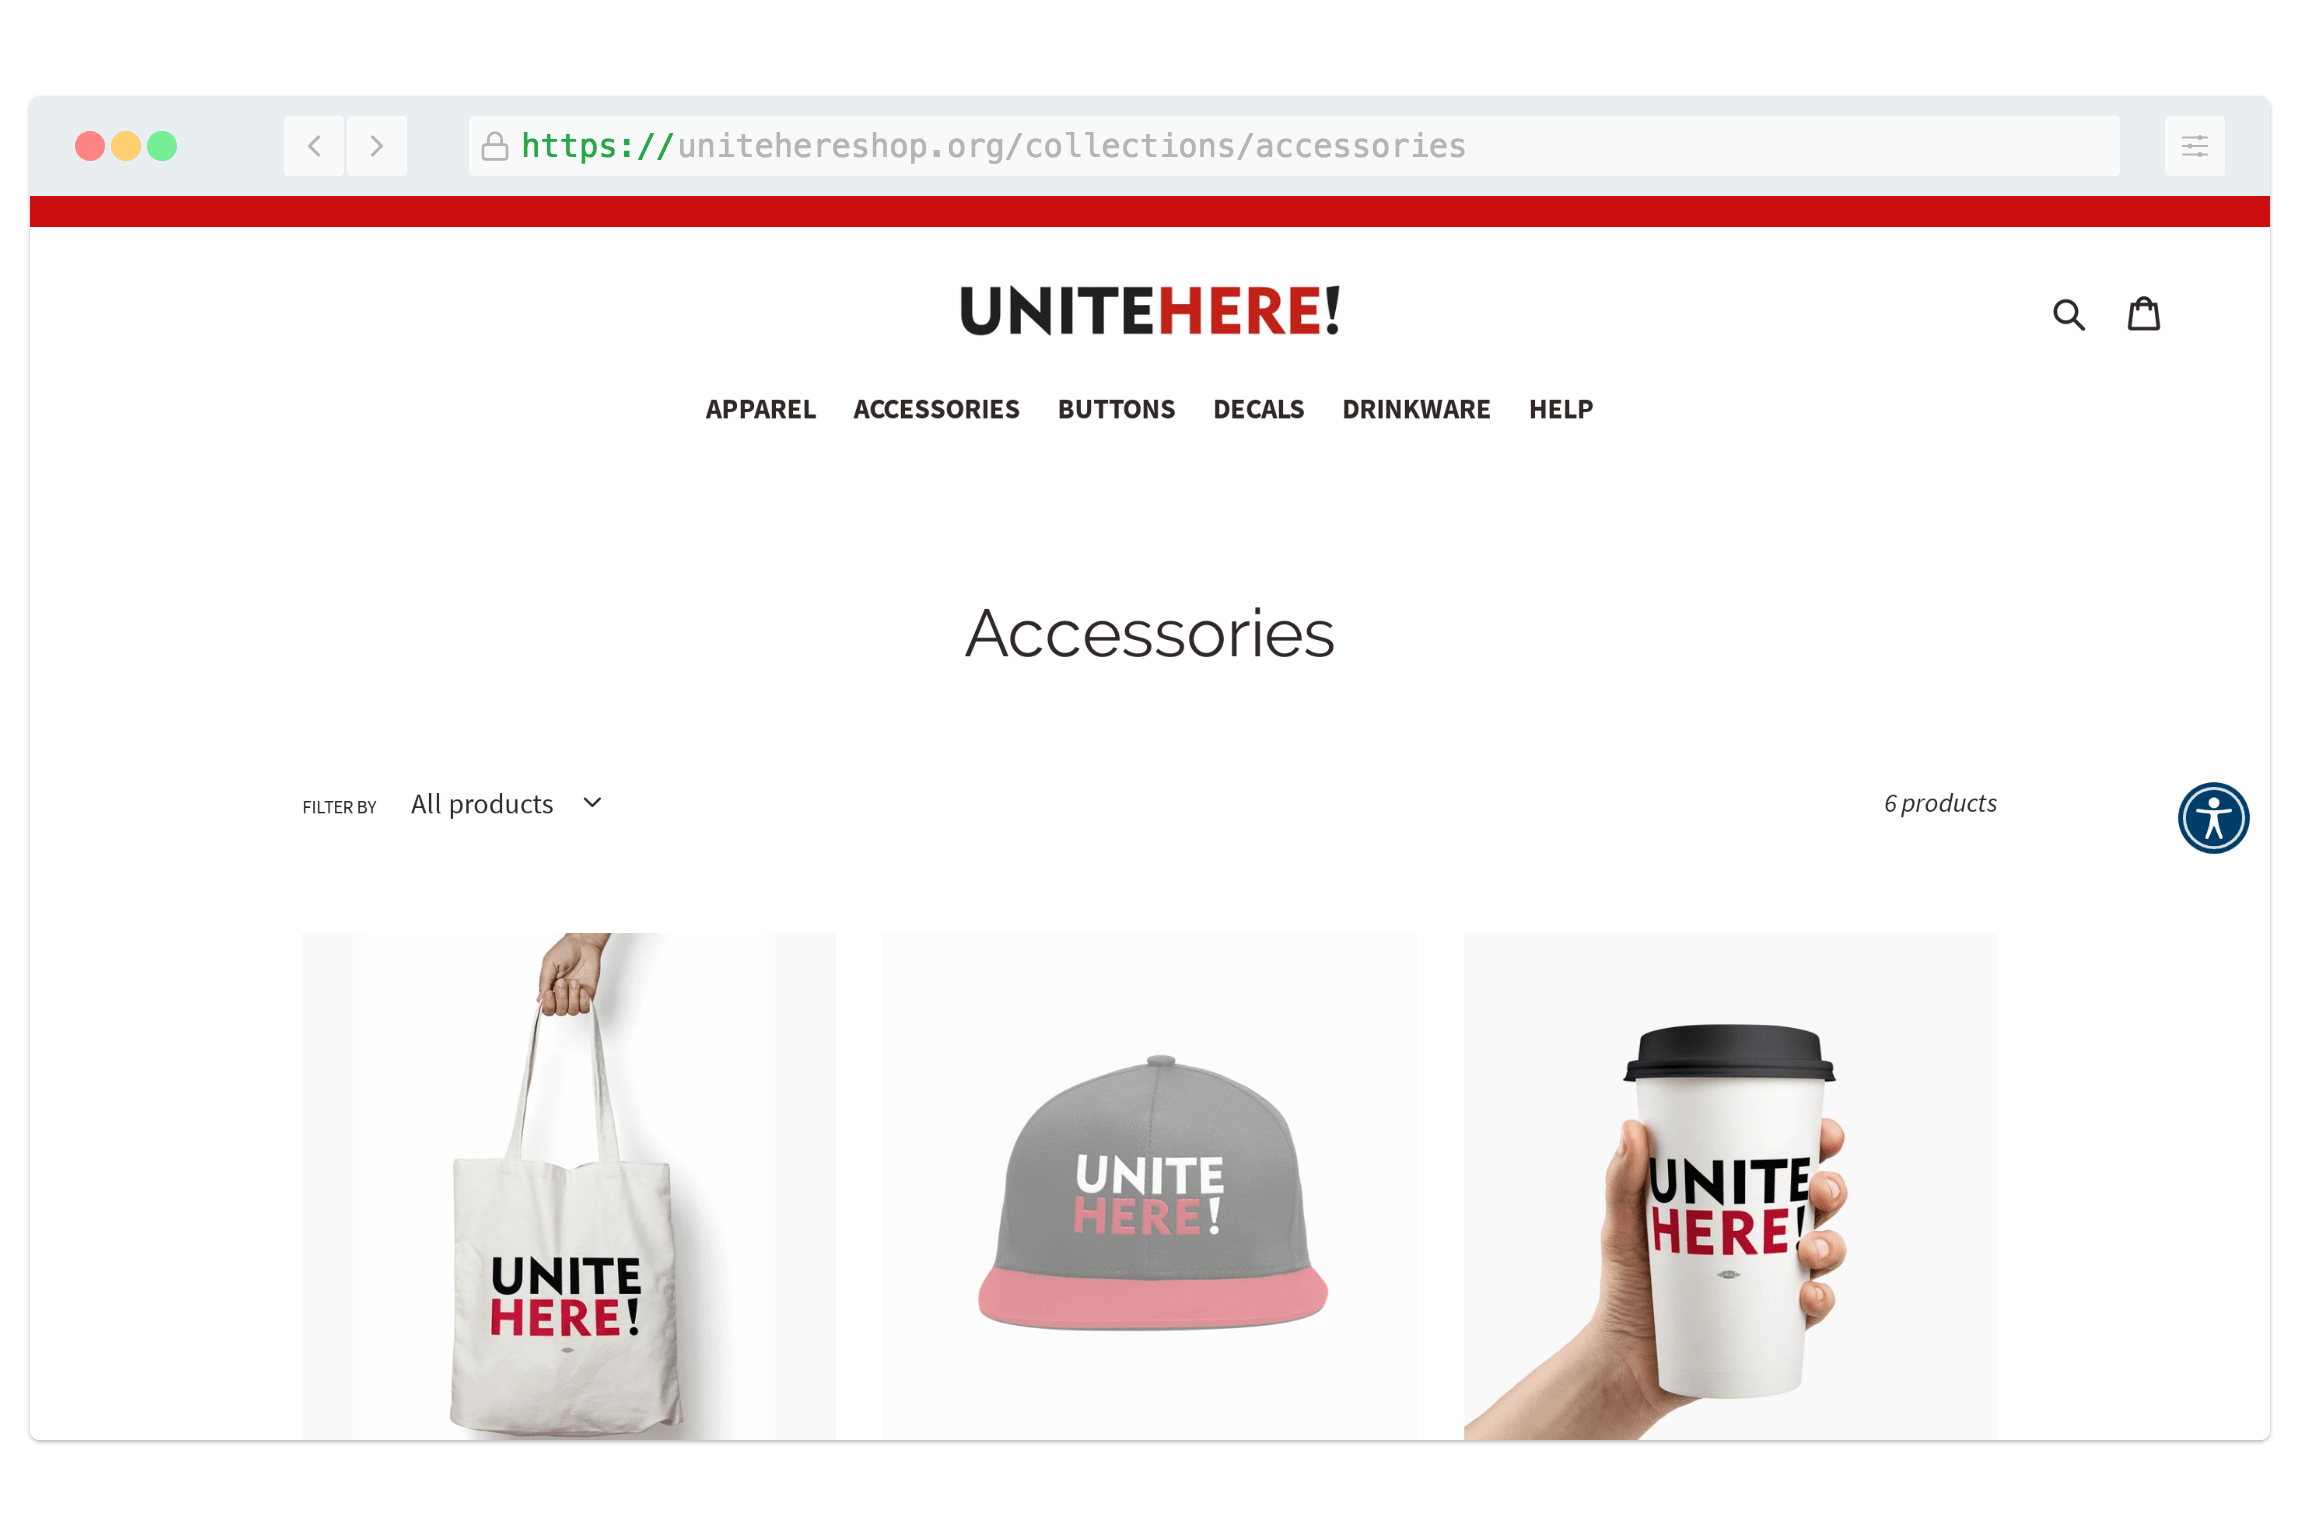 Print on demand web store showing custom merch from Unite Here's online store 